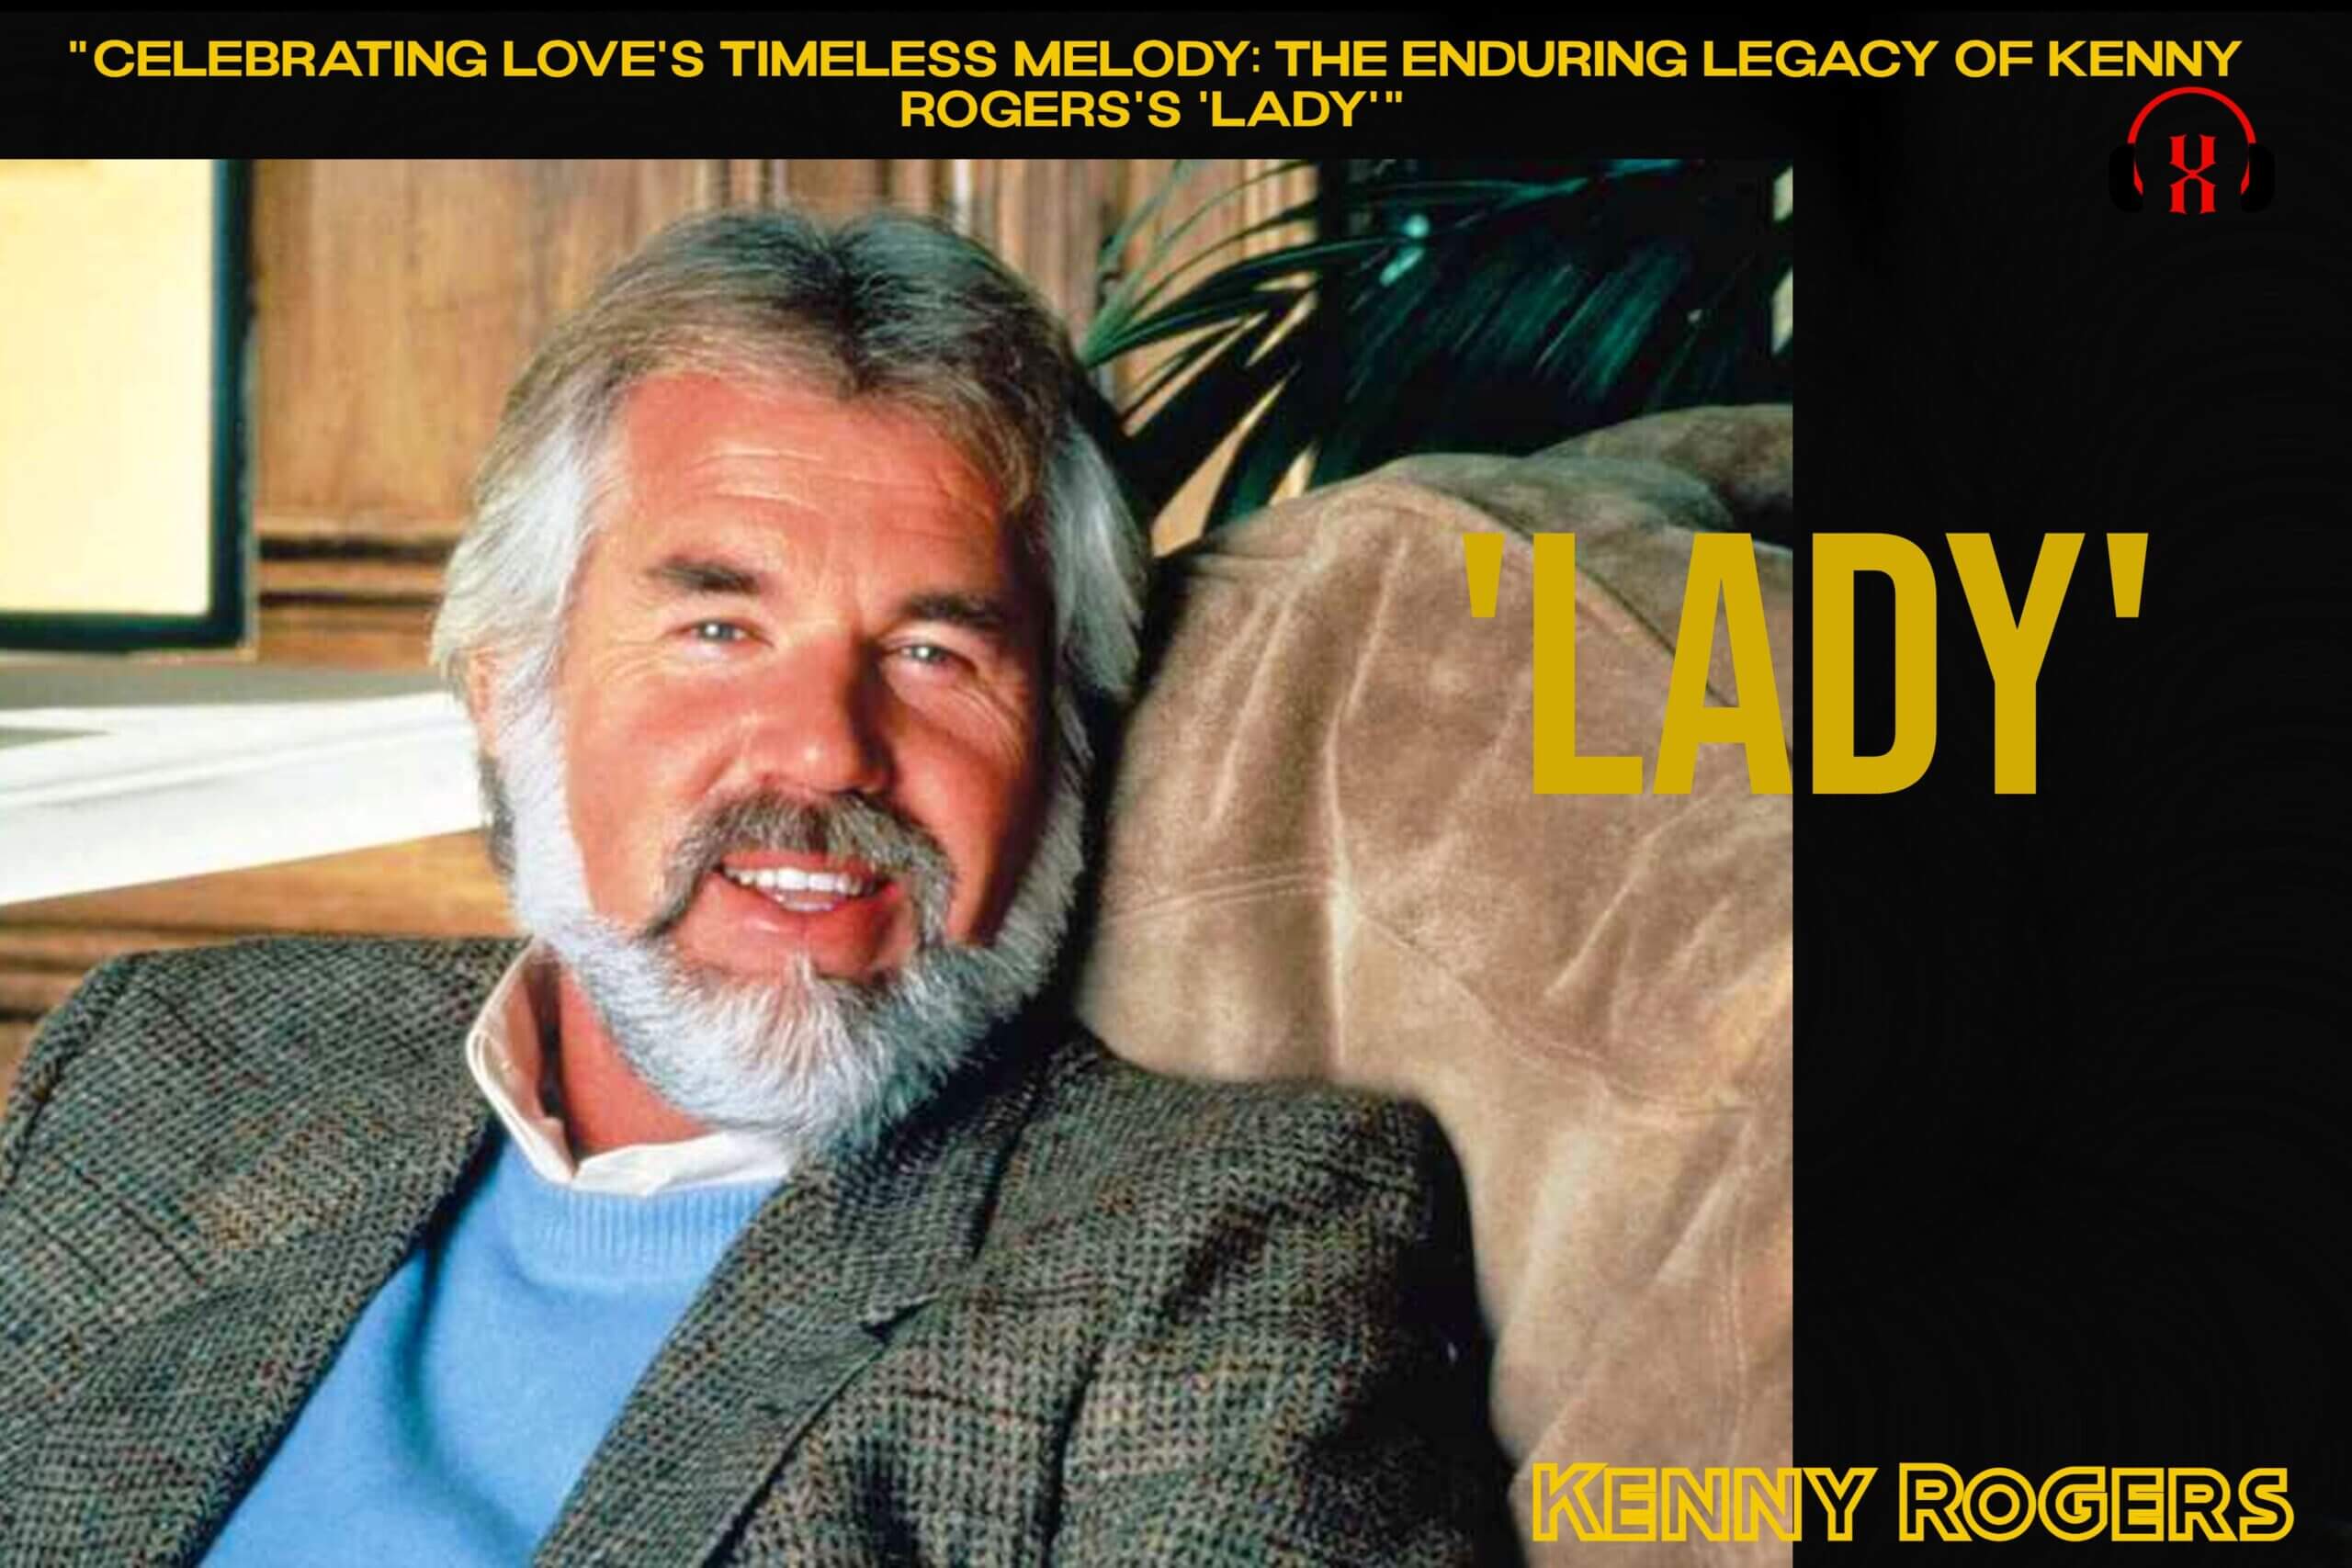 “Celebrating Love’s Timeless Melody: The Enduring Legacy of Kenny Rogers’s ‘Lady'”